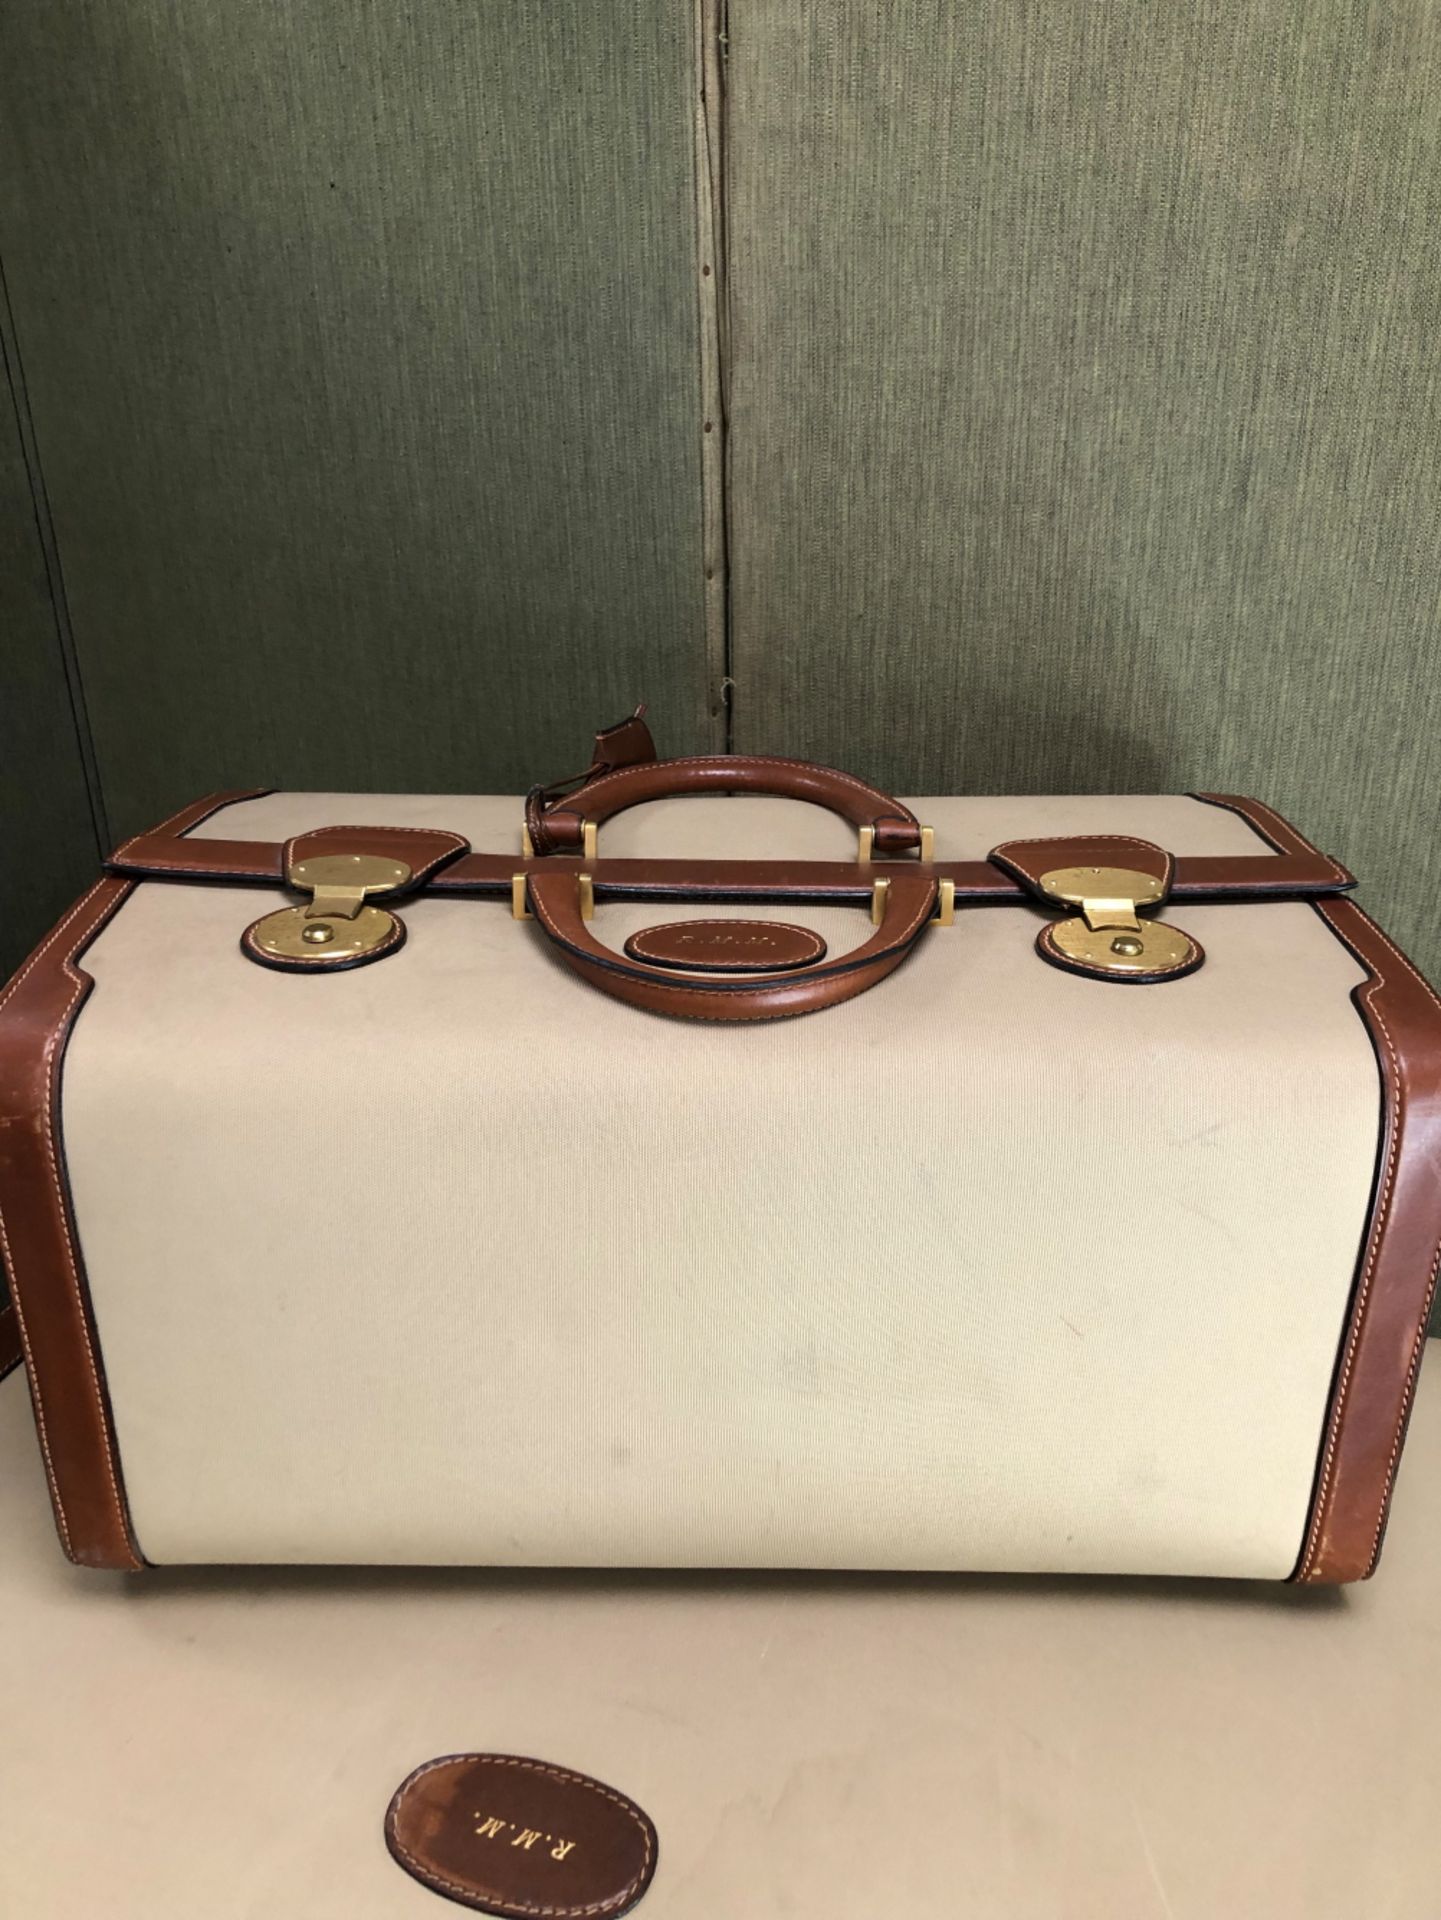 HARRODS VINTAGE MONOGRAM TAN AND BROWN SUITCASE AND TRAVEL BAG(2) - Image 2 of 33